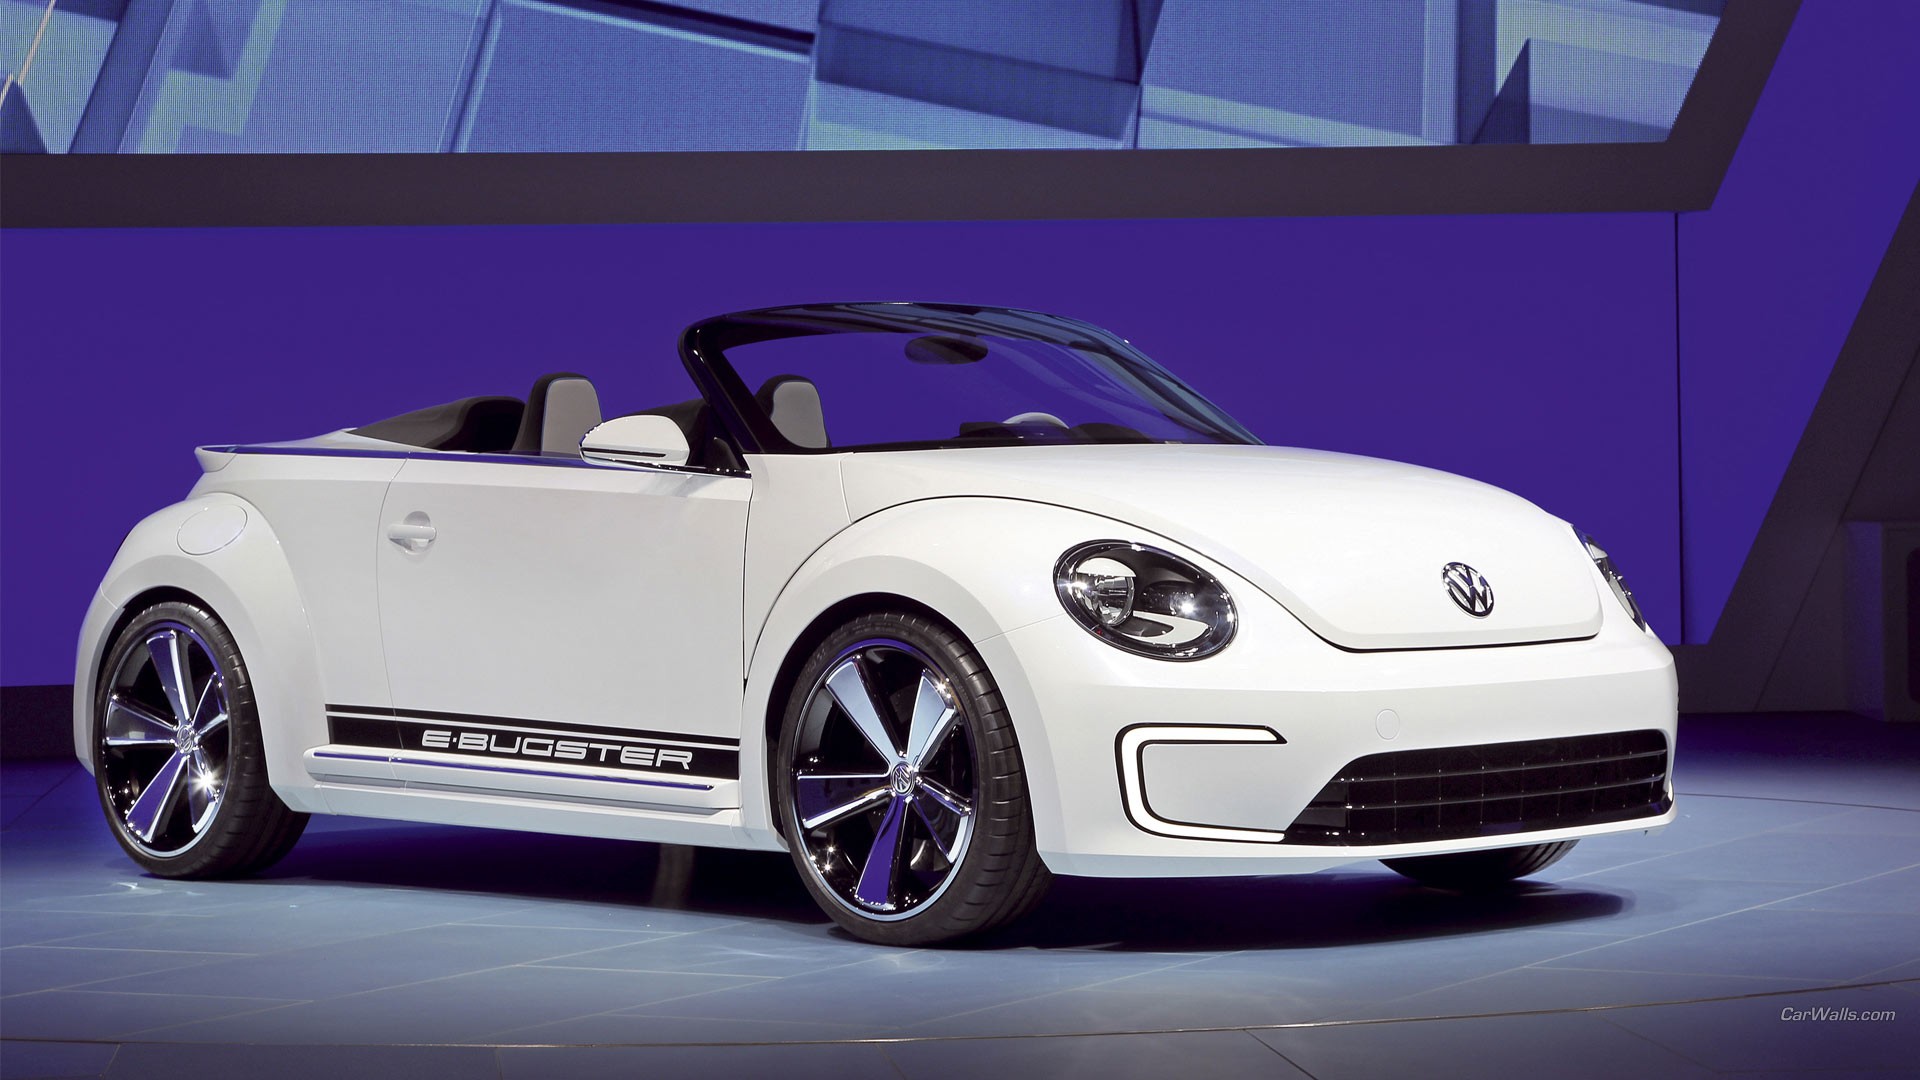 General 1920x1080 VW E-Bugster Volkswagen car Volkswagen New Beetle watermarked vehicle white cars German cars Volkswagen Group electric car convertible